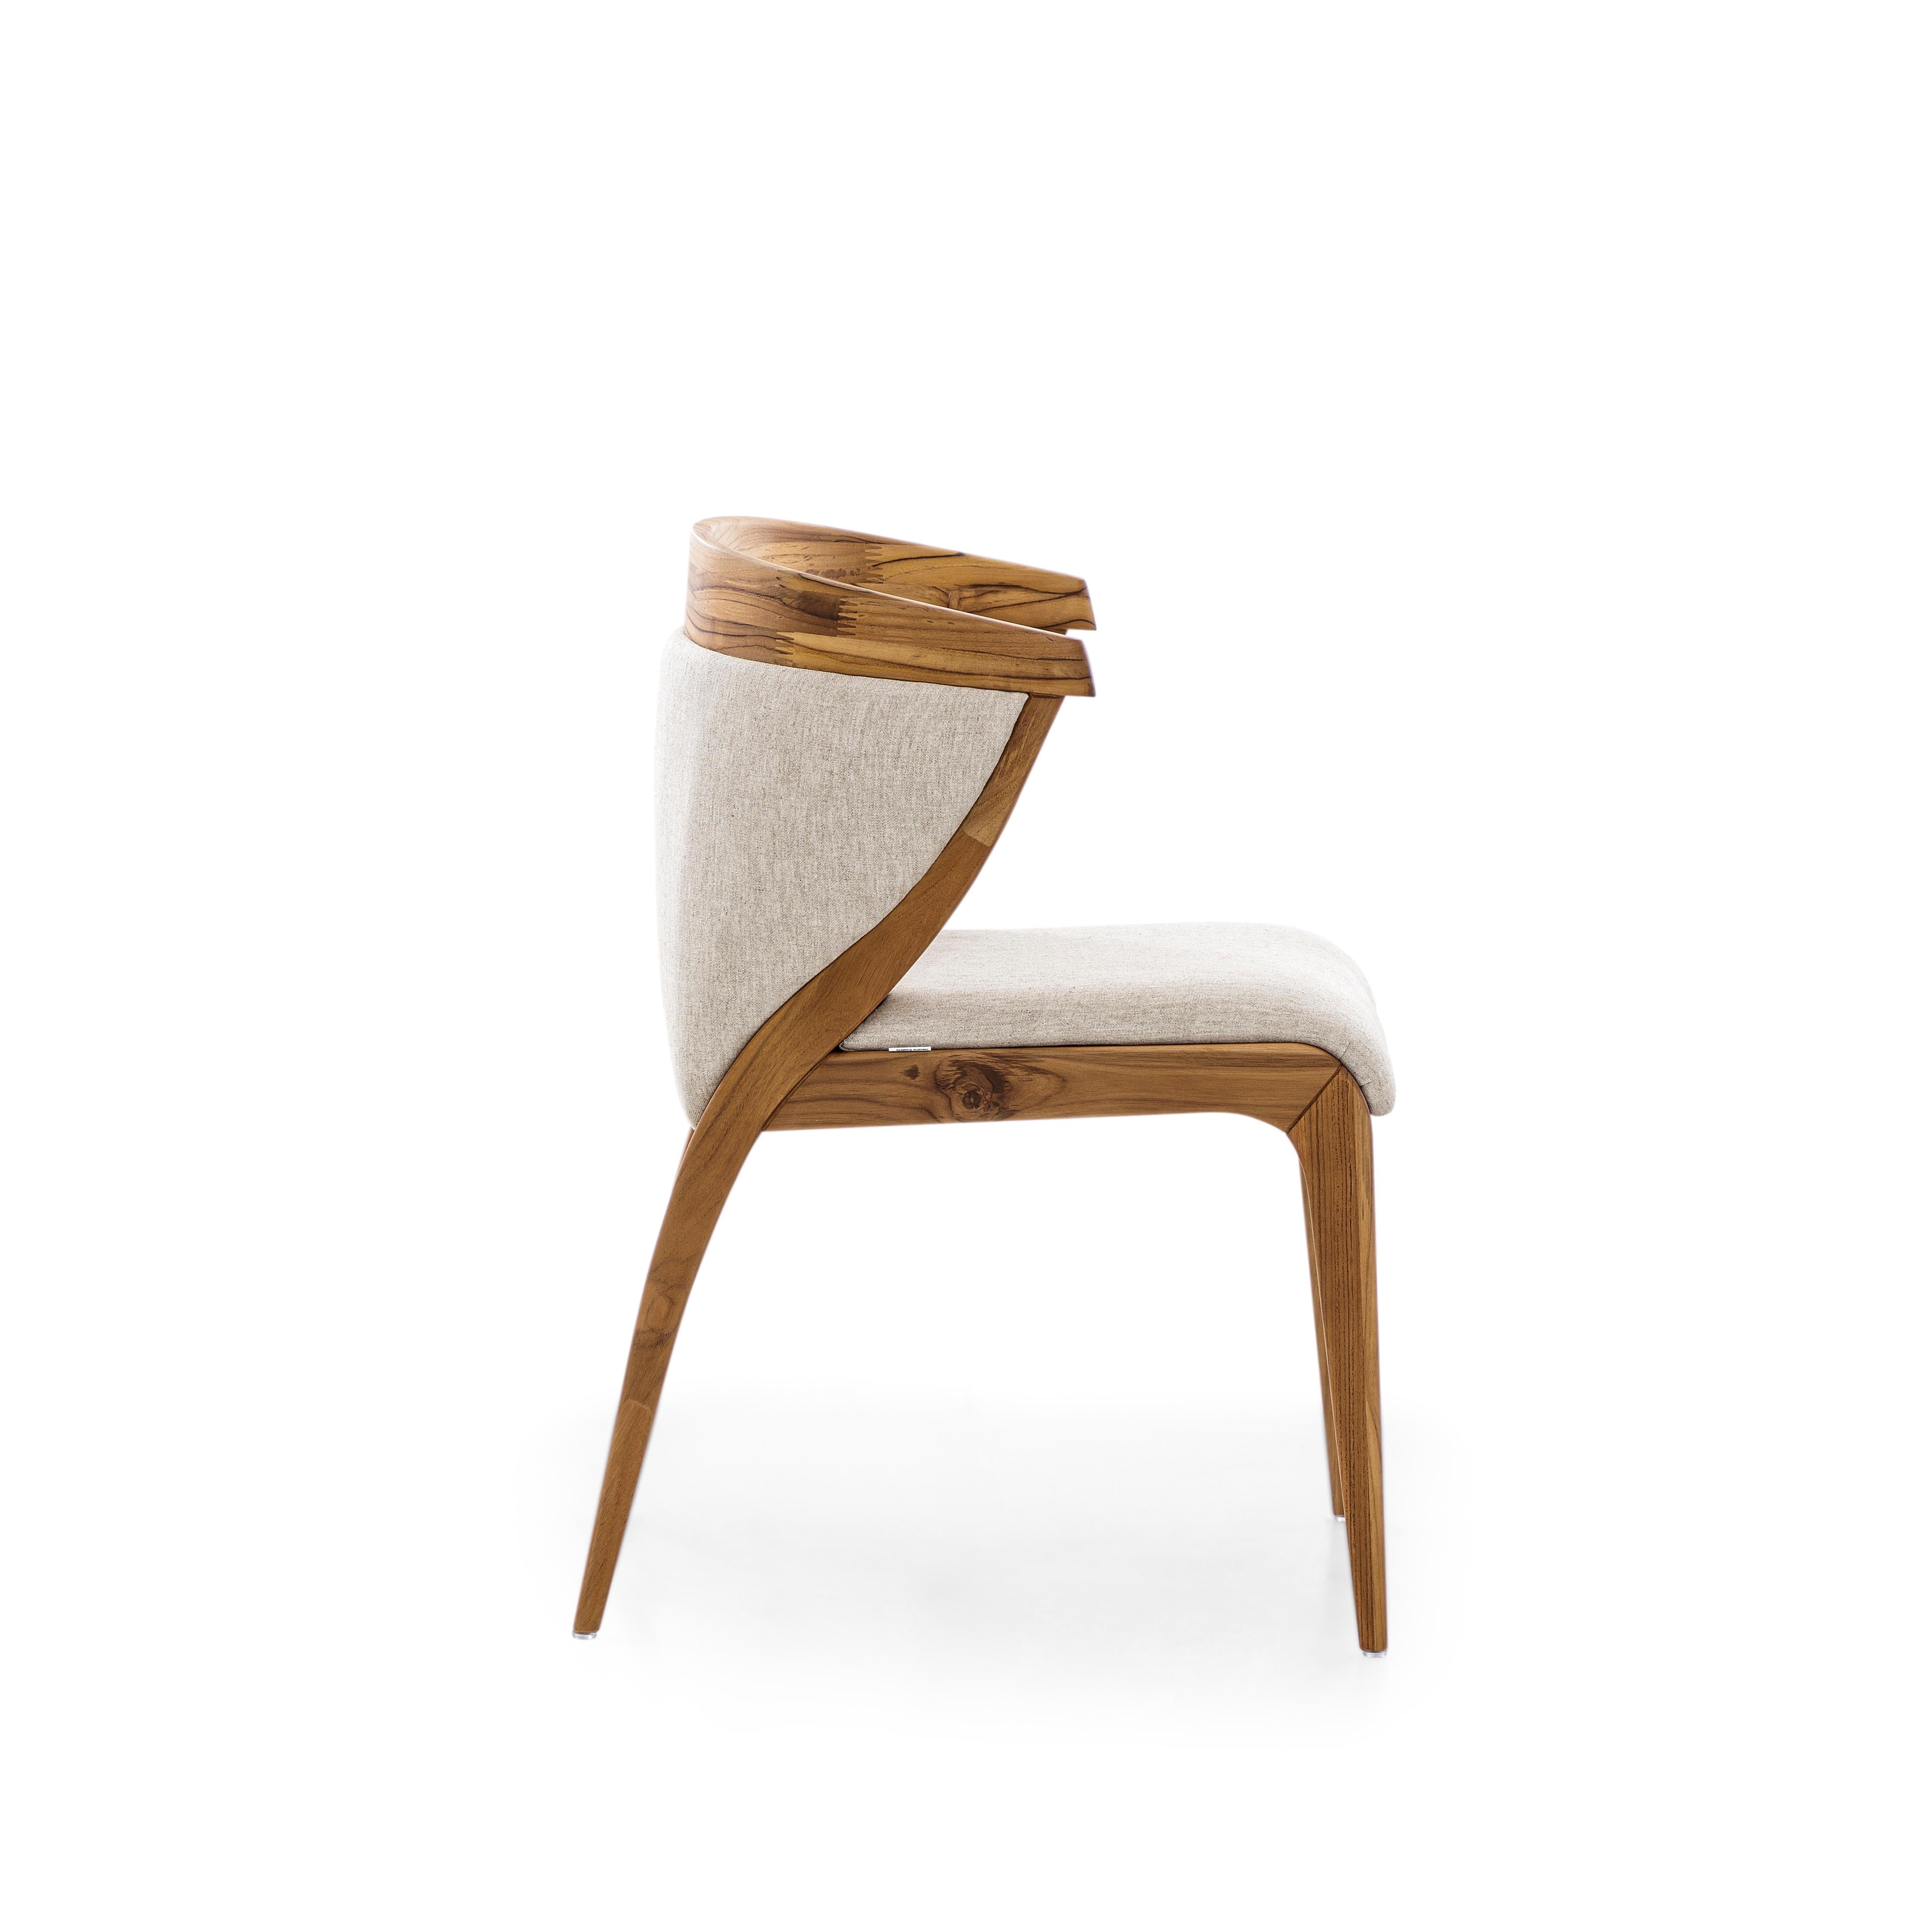 Our Uultis team has created the beautifully shaped Mat dining chair to decorate your beautiful dining table with an upholstered back and seat ivory fabric and a teak wood finish. This chair has a beautiful simple but elegant design that it will